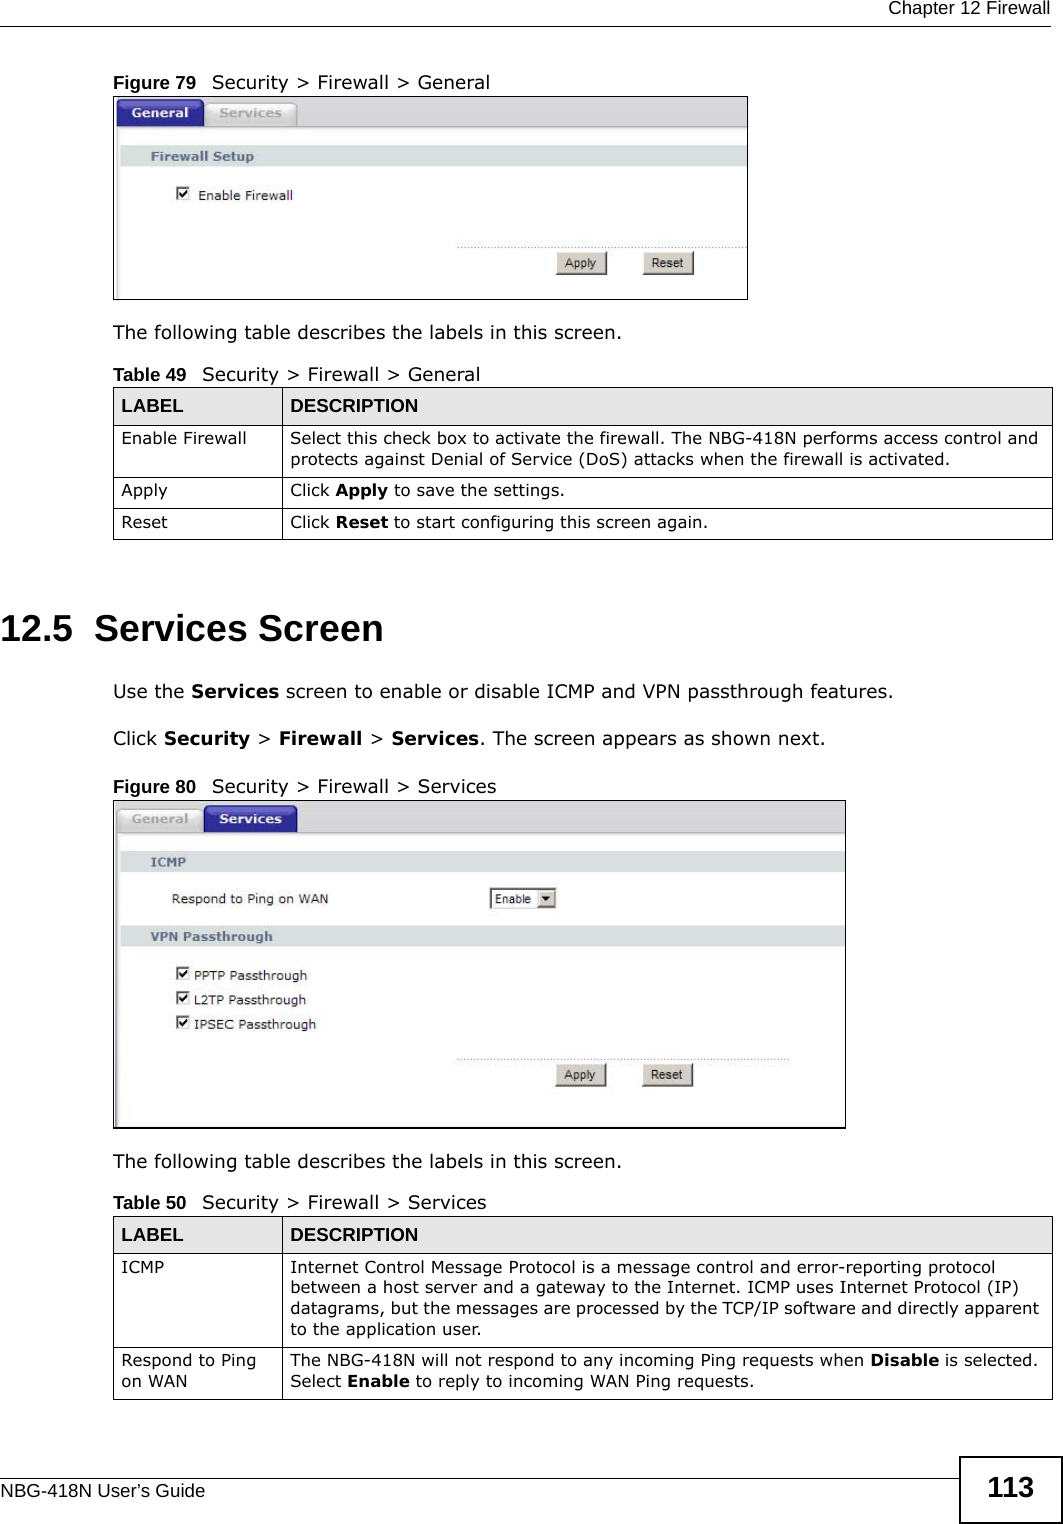  Chapter 12 FirewallNBG-418N User’s Guide 113Figure 79   Security &gt; Firewall &gt; General The following table describes the labels in this screen.12.5  Services Screen   Use the Services screen to enable or disable ICMP and VPN passthrough features. Click Security &gt; Firewall &gt; Services. The screen appears as shown next. Figure 80   Security &gt; Firewall &gt; Services The following table describes the labels in this screen.Table 49   Security &gt; Firewall &gt; GeneralLABEL DESCRIPTIONEnable Firewall Select this check box to activate the firewall. The NBG-418N performs access control and protects against Denial of Service (DoS) attacks when the firewall is activated.Apply Click Apply to save the settings. Reset Click Reset to start configuring this screen again. Table 50   Security &gt; Firewall &gt; ServicesLABEL DESCRIPTIONICMP Internet Control Message Protocol is a message control and error-reporting protocol between a host server and a gateway to the Internet. ICMP uses Internet Protocol (IP) datagrams, but the messages are processed by the TCP/IP software and directly apparent to the application user. Respond to Ping on WANThe NBG-418N will not respond to any incoming Ping requests when Disable is selected. Select Enable to reply to incoming WAN Ping requests. 